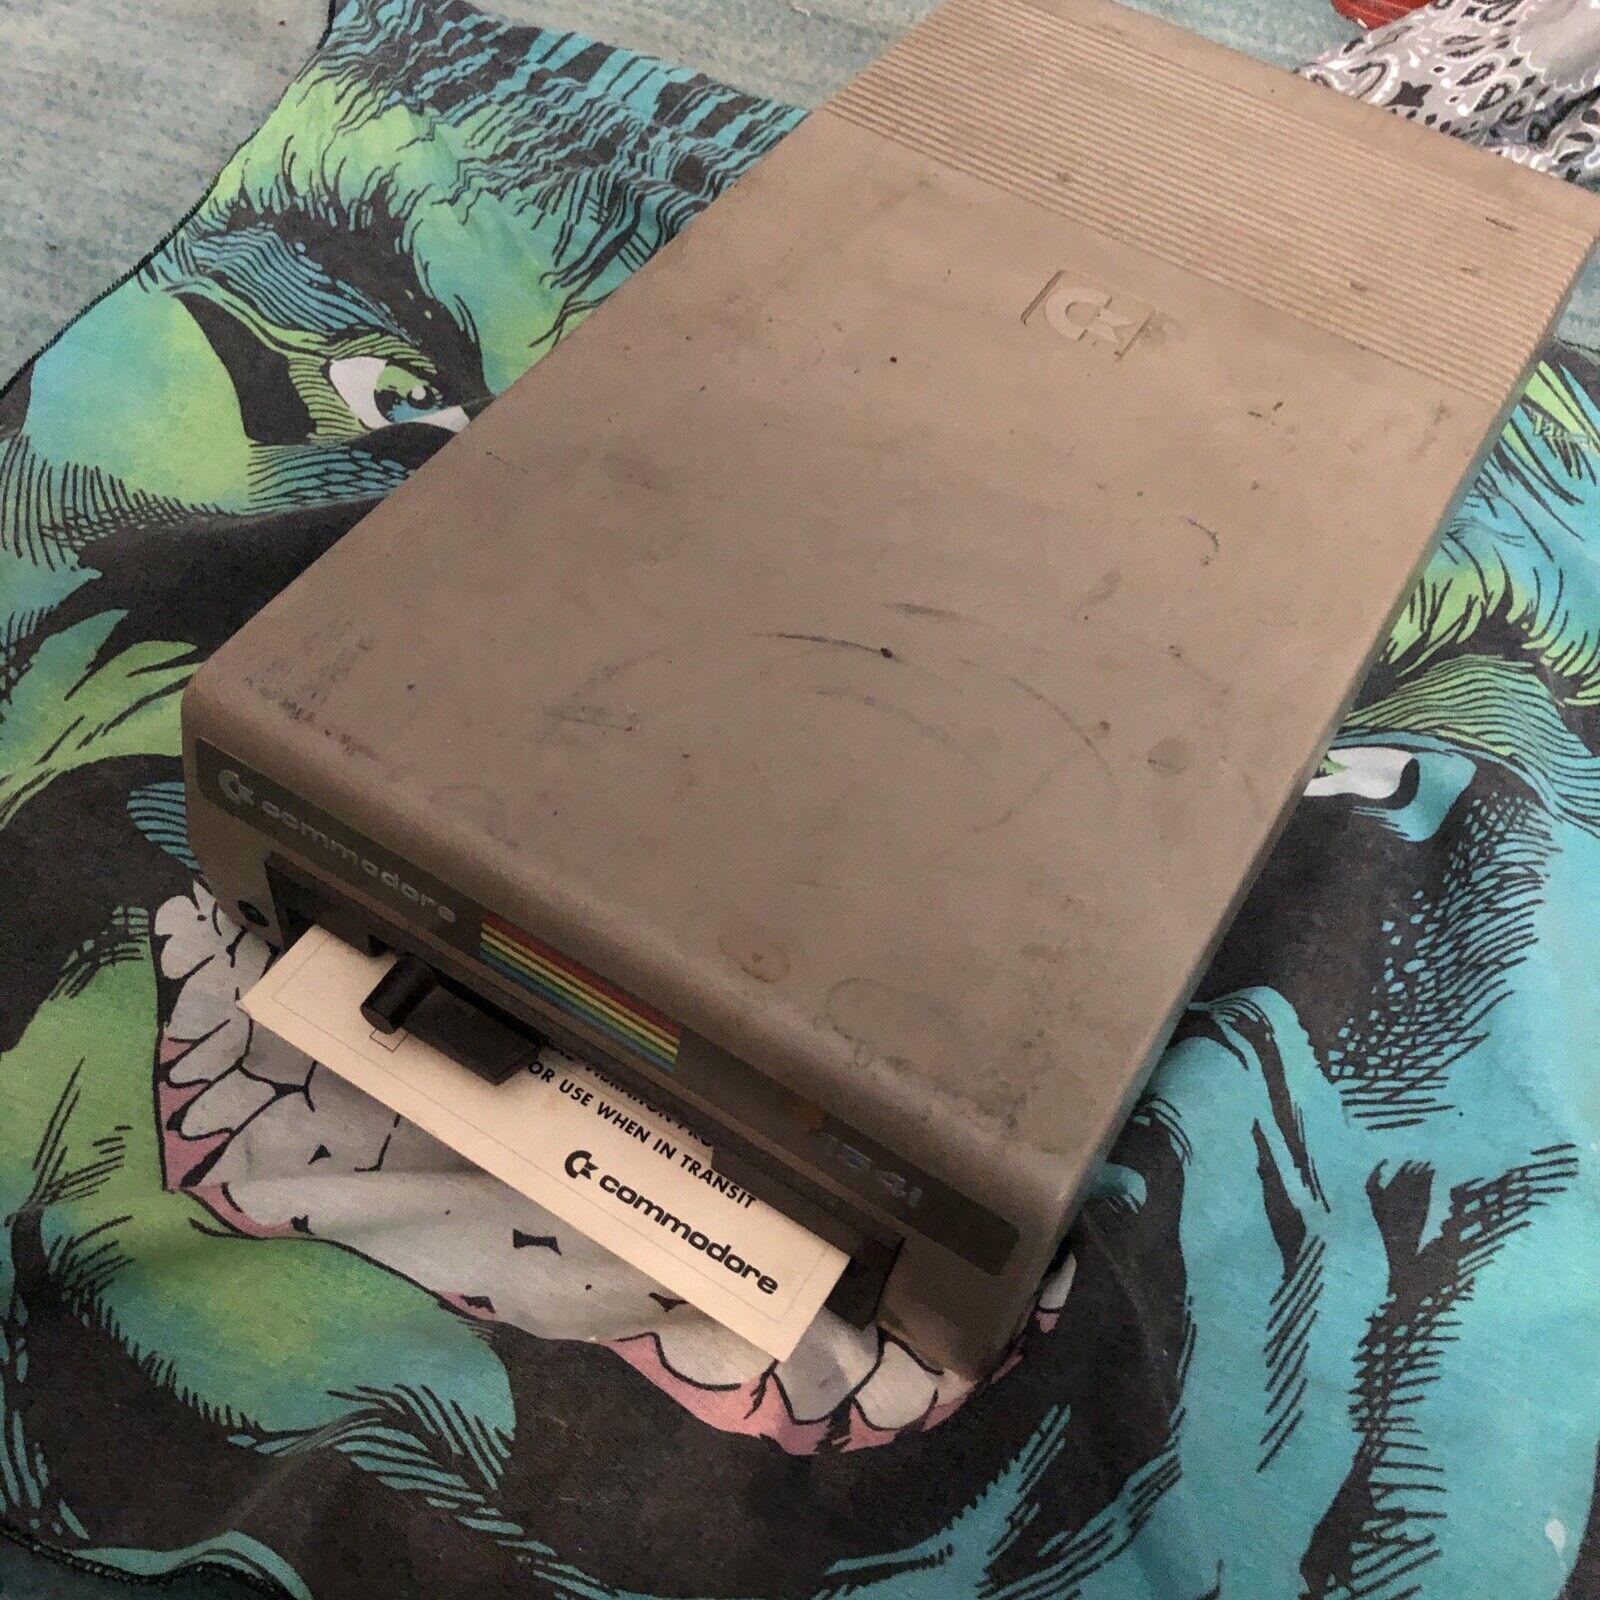 Vintage Commodore 1541 Floppy Disk Drive  (Untested) - Authentic